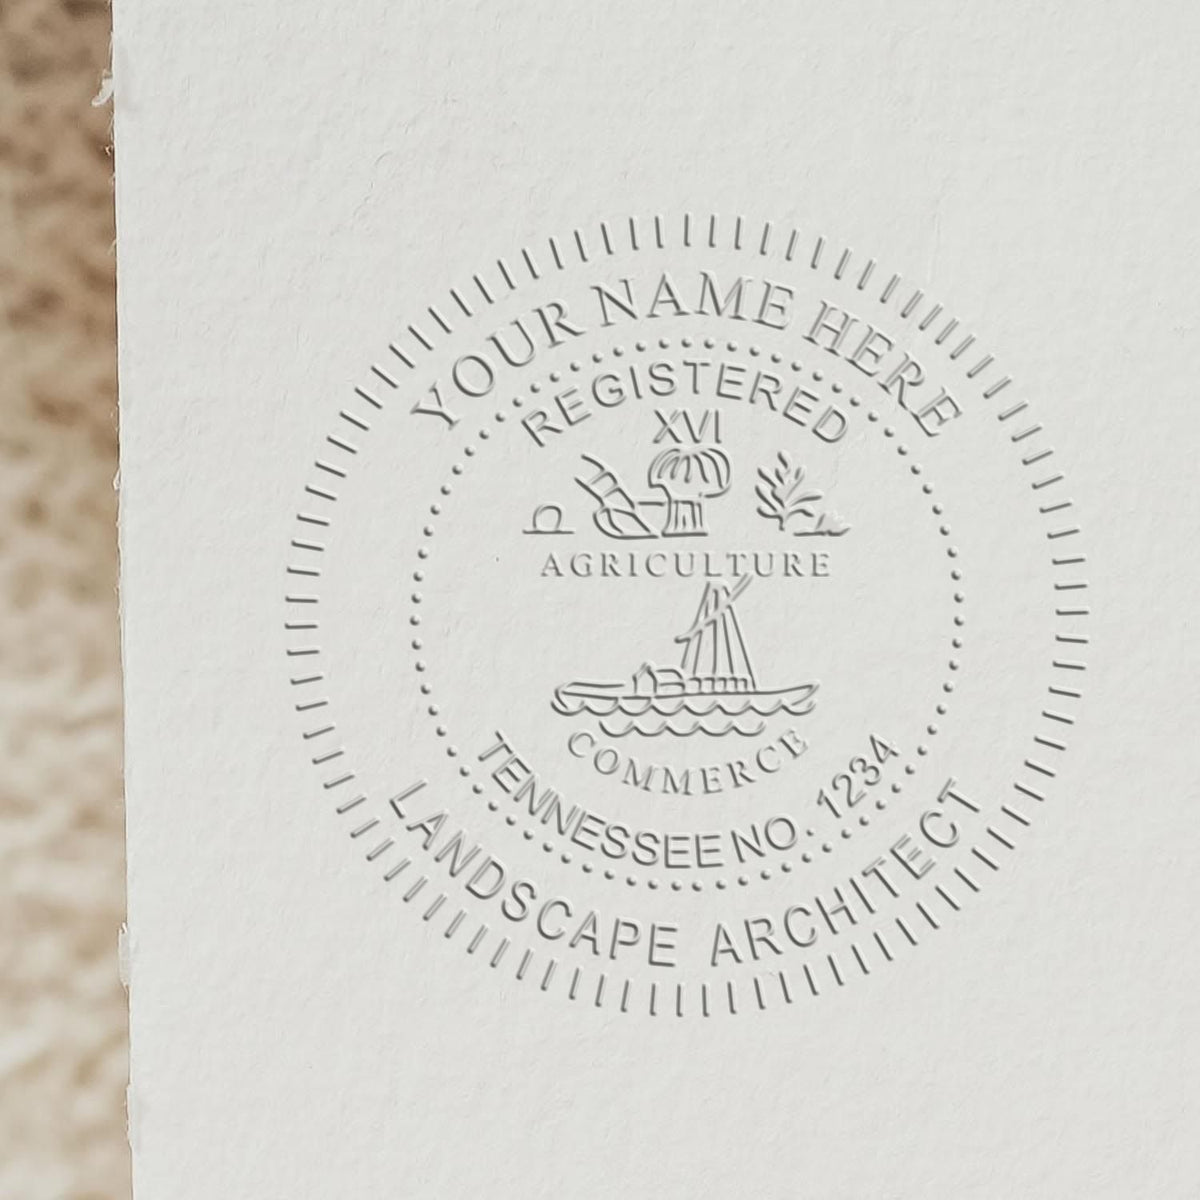 The Soft Pocket Tennessee Landscape Architect Embosser stamp impression comes to life with a crisp, detailed photo on paper - showcasing true professional quality.